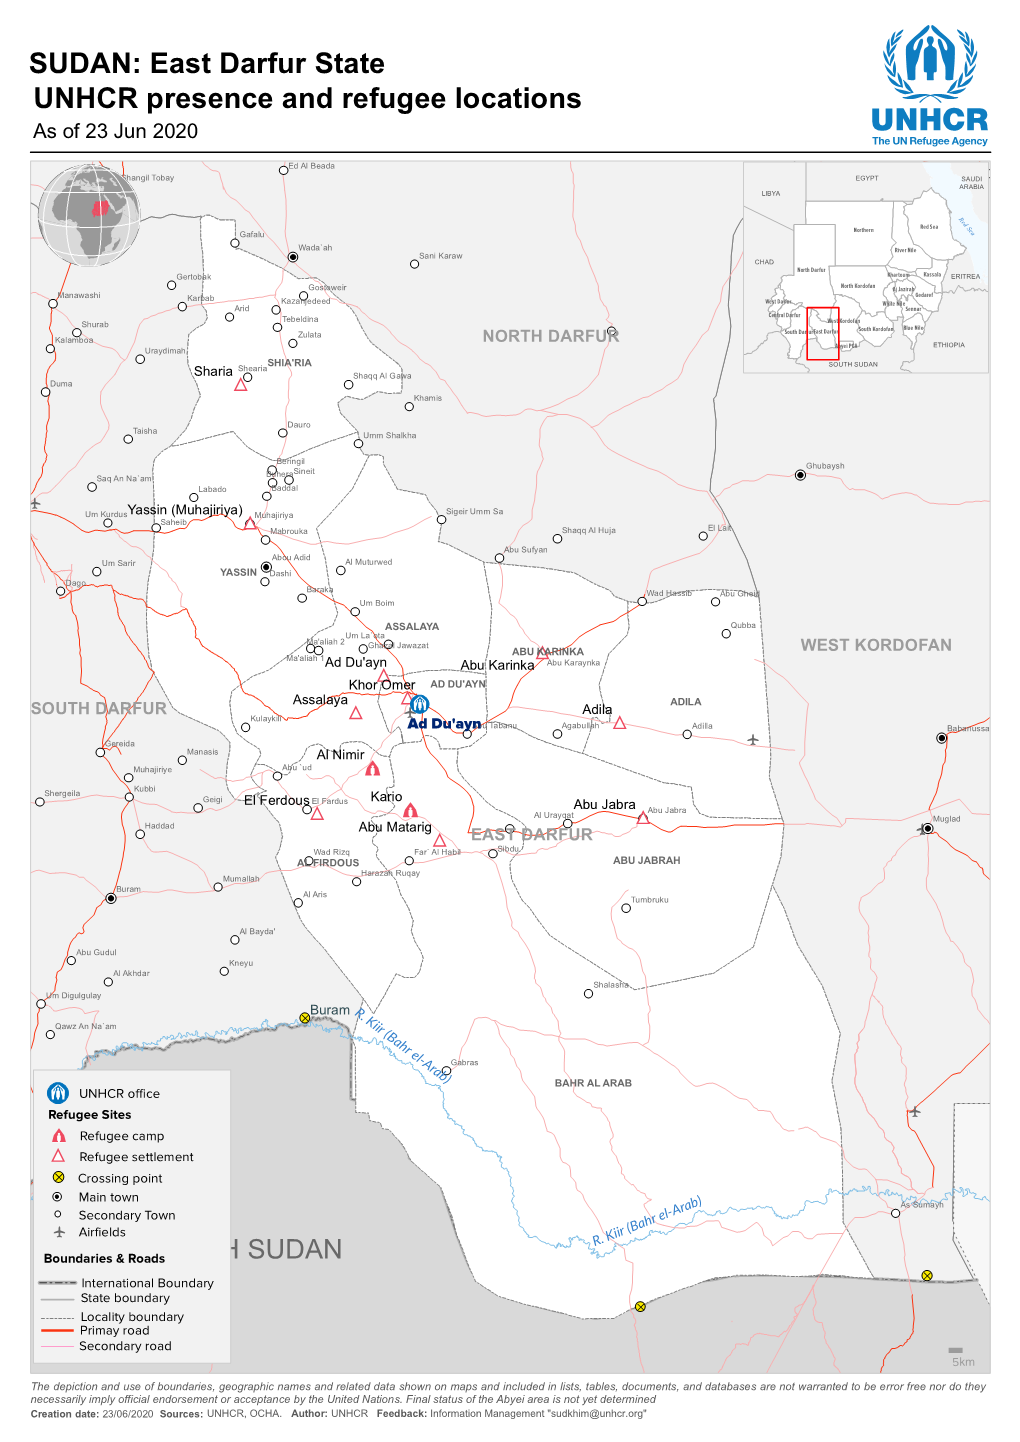 SUDAN: East Darfur State UNHCR Presence and Refugee Locations As of 23 Jun 2020